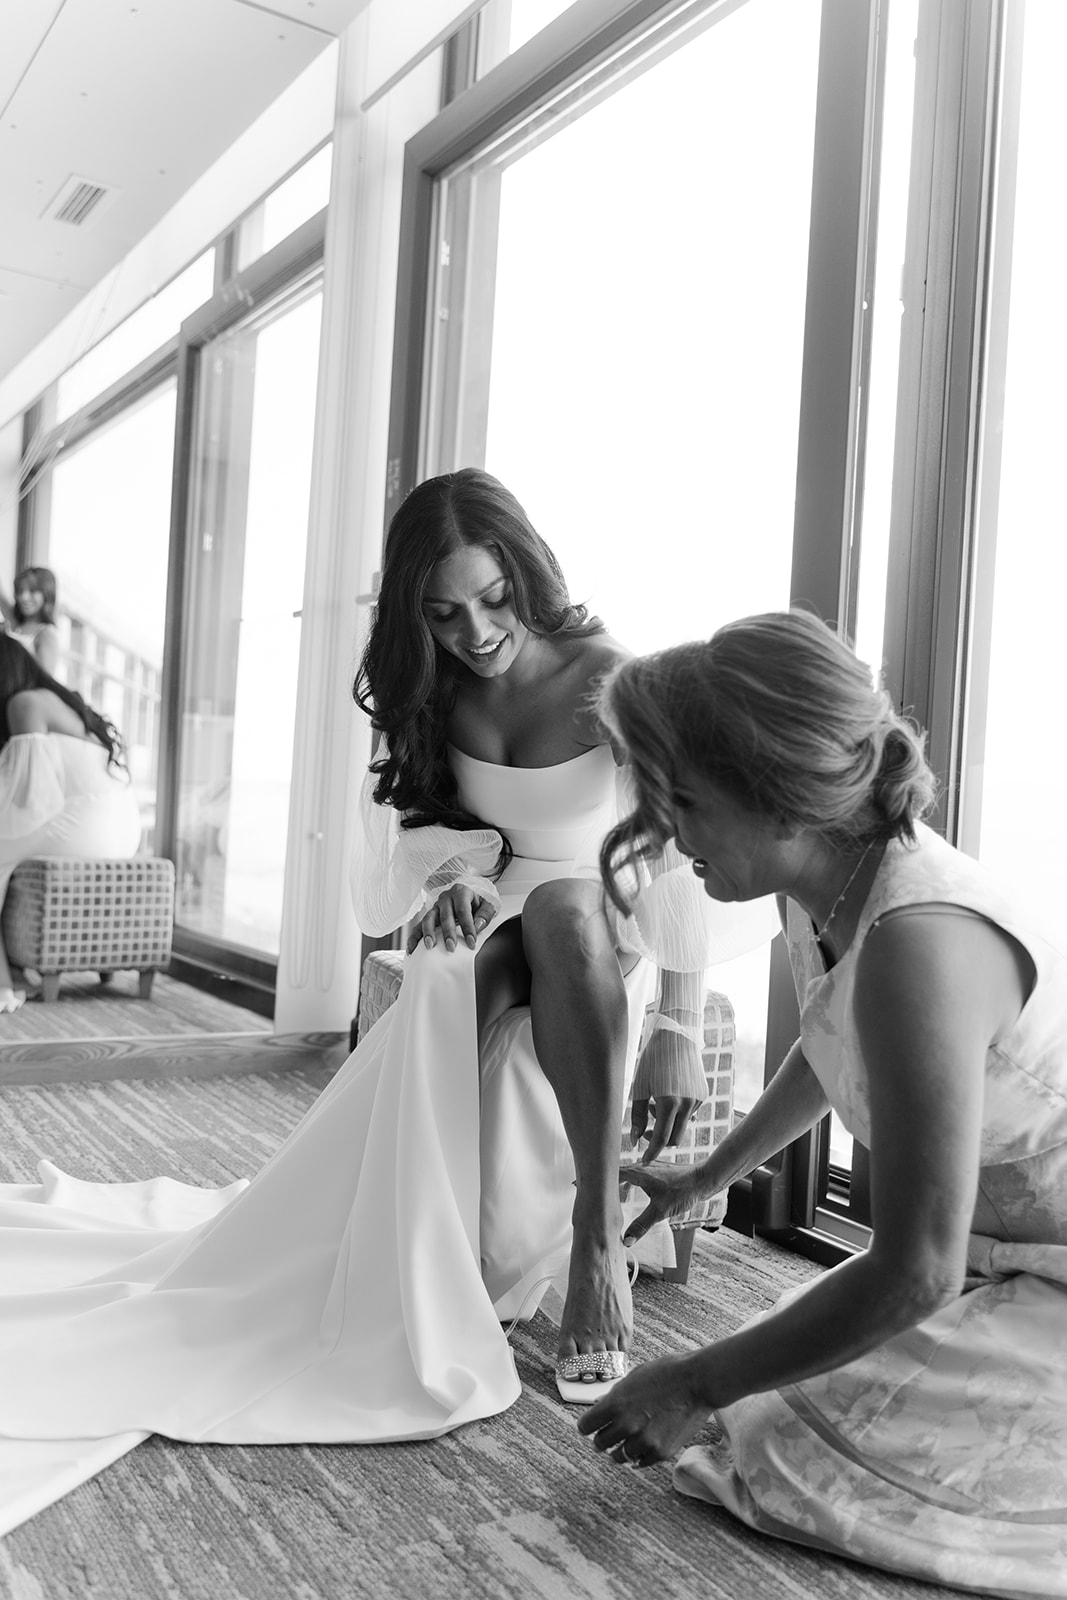 Details of putting on her wedding dress